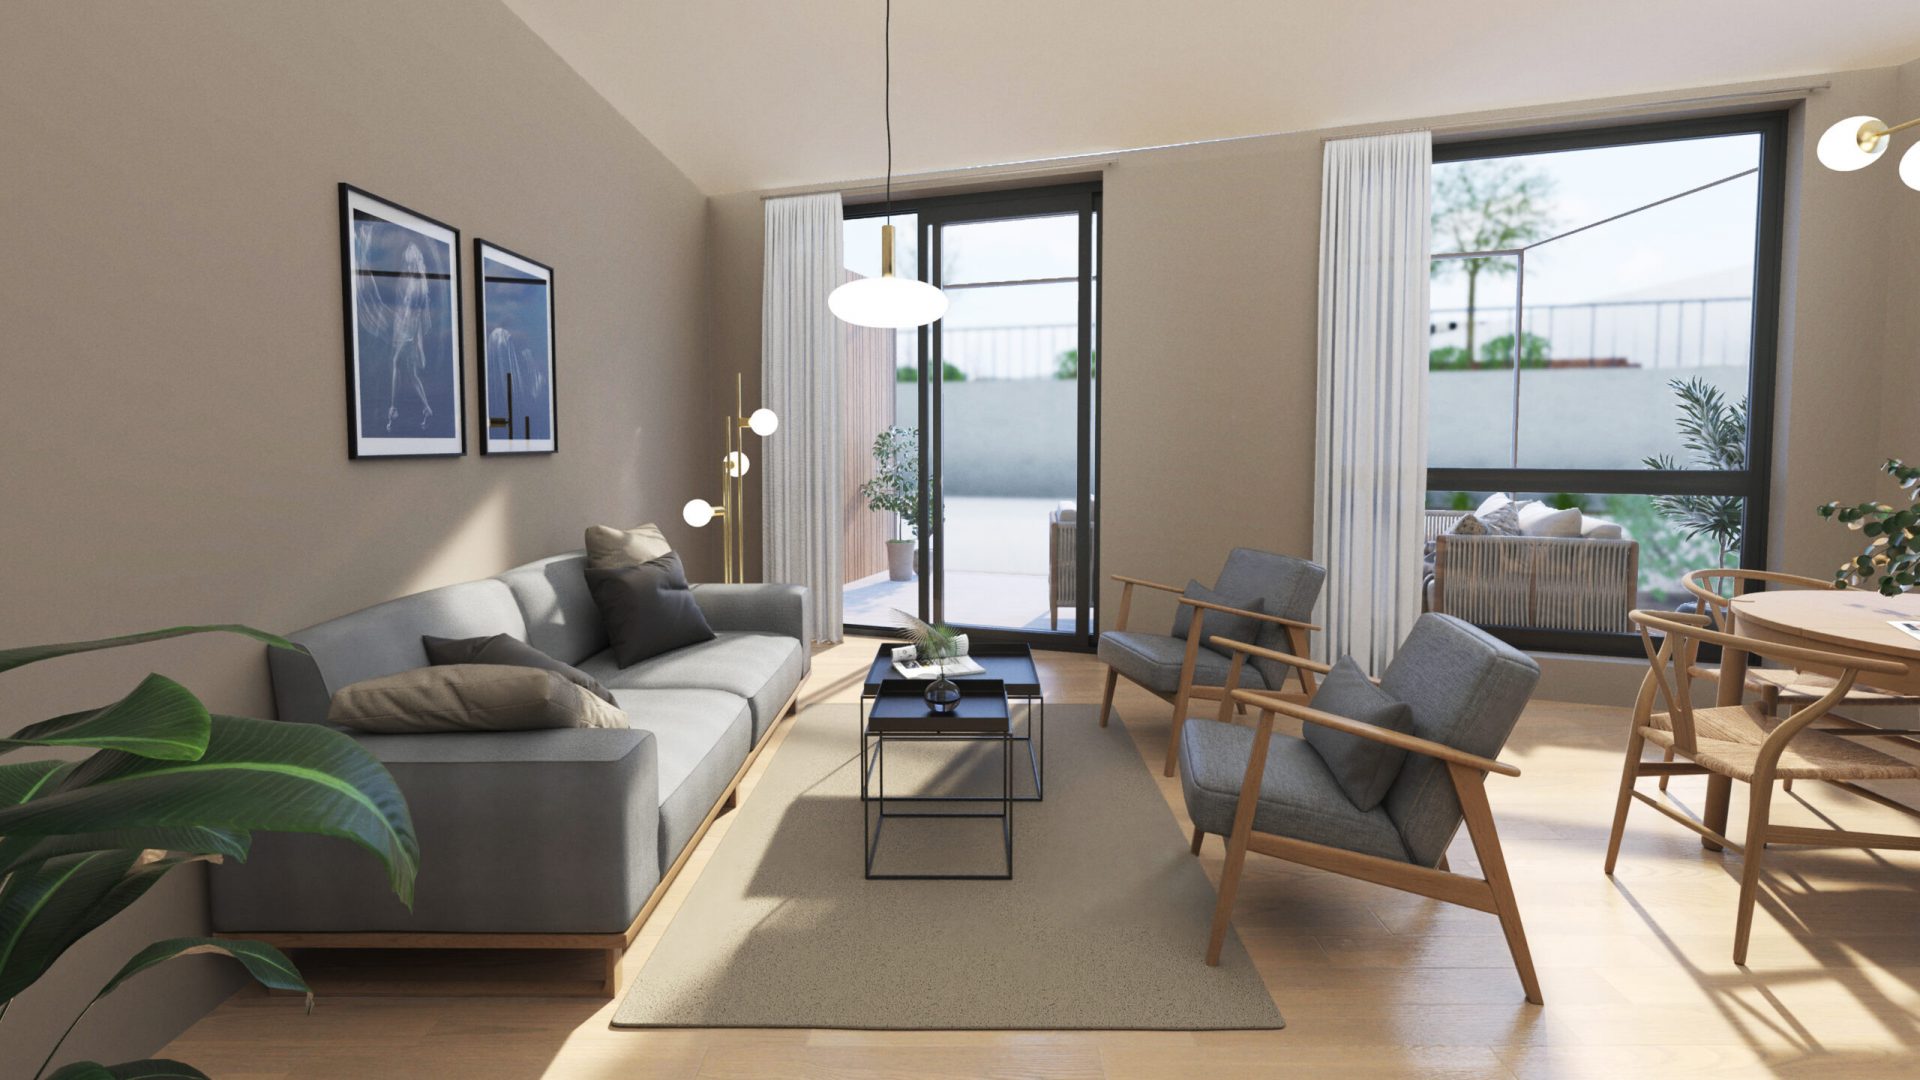 An example of a high definition rendering created by QiSpace of a living room designed to help sell apartments faster.